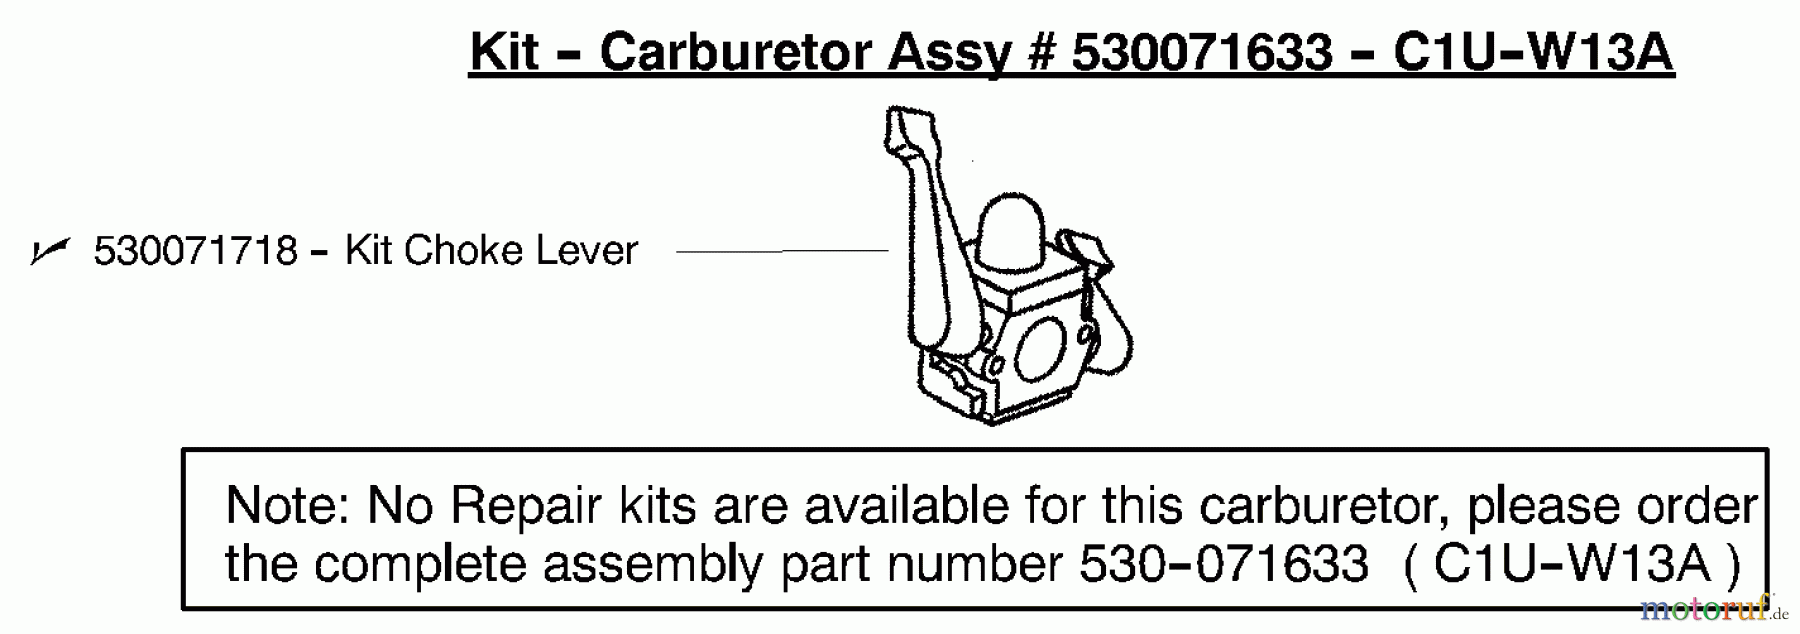  Poulan / Weed Eater Heckenscheren GHT180LE (Type 2) - Weed Eater Hedge Trimmer Carburetor Assembly (C1U-W13A) PN 530071633